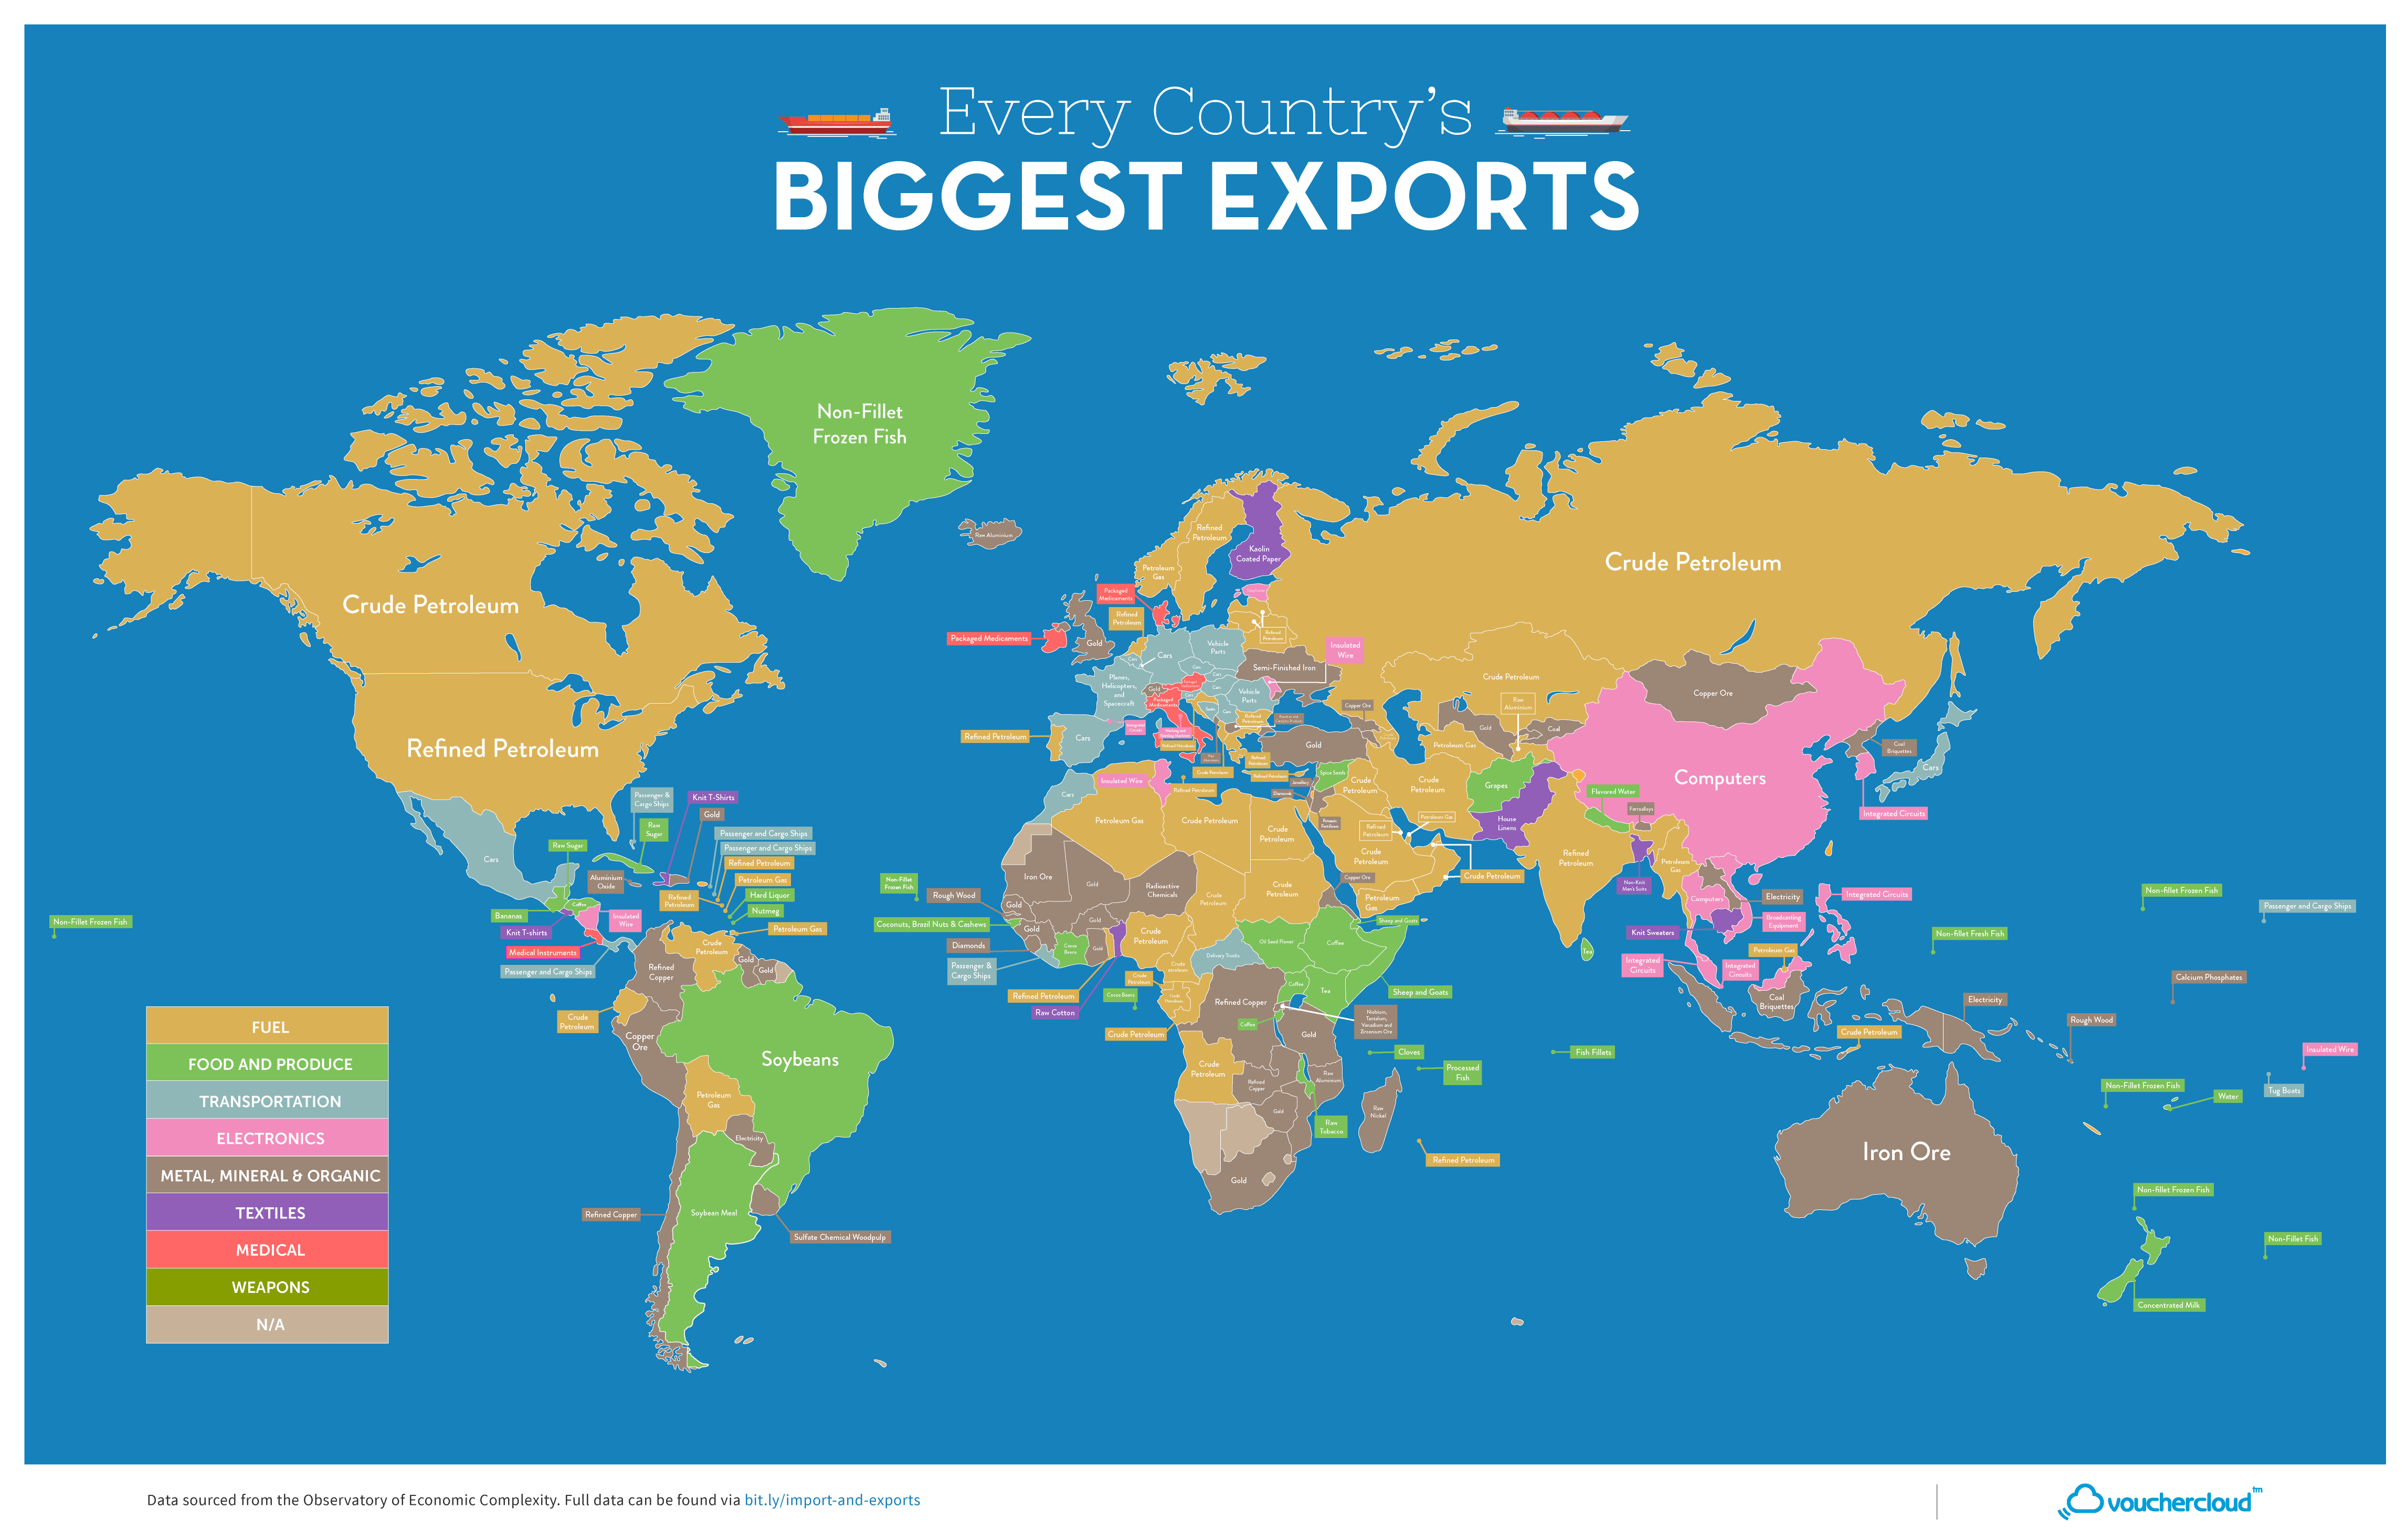 Diamonds, Cars and Frozen Fish - Every Country's Biggest Import & Export